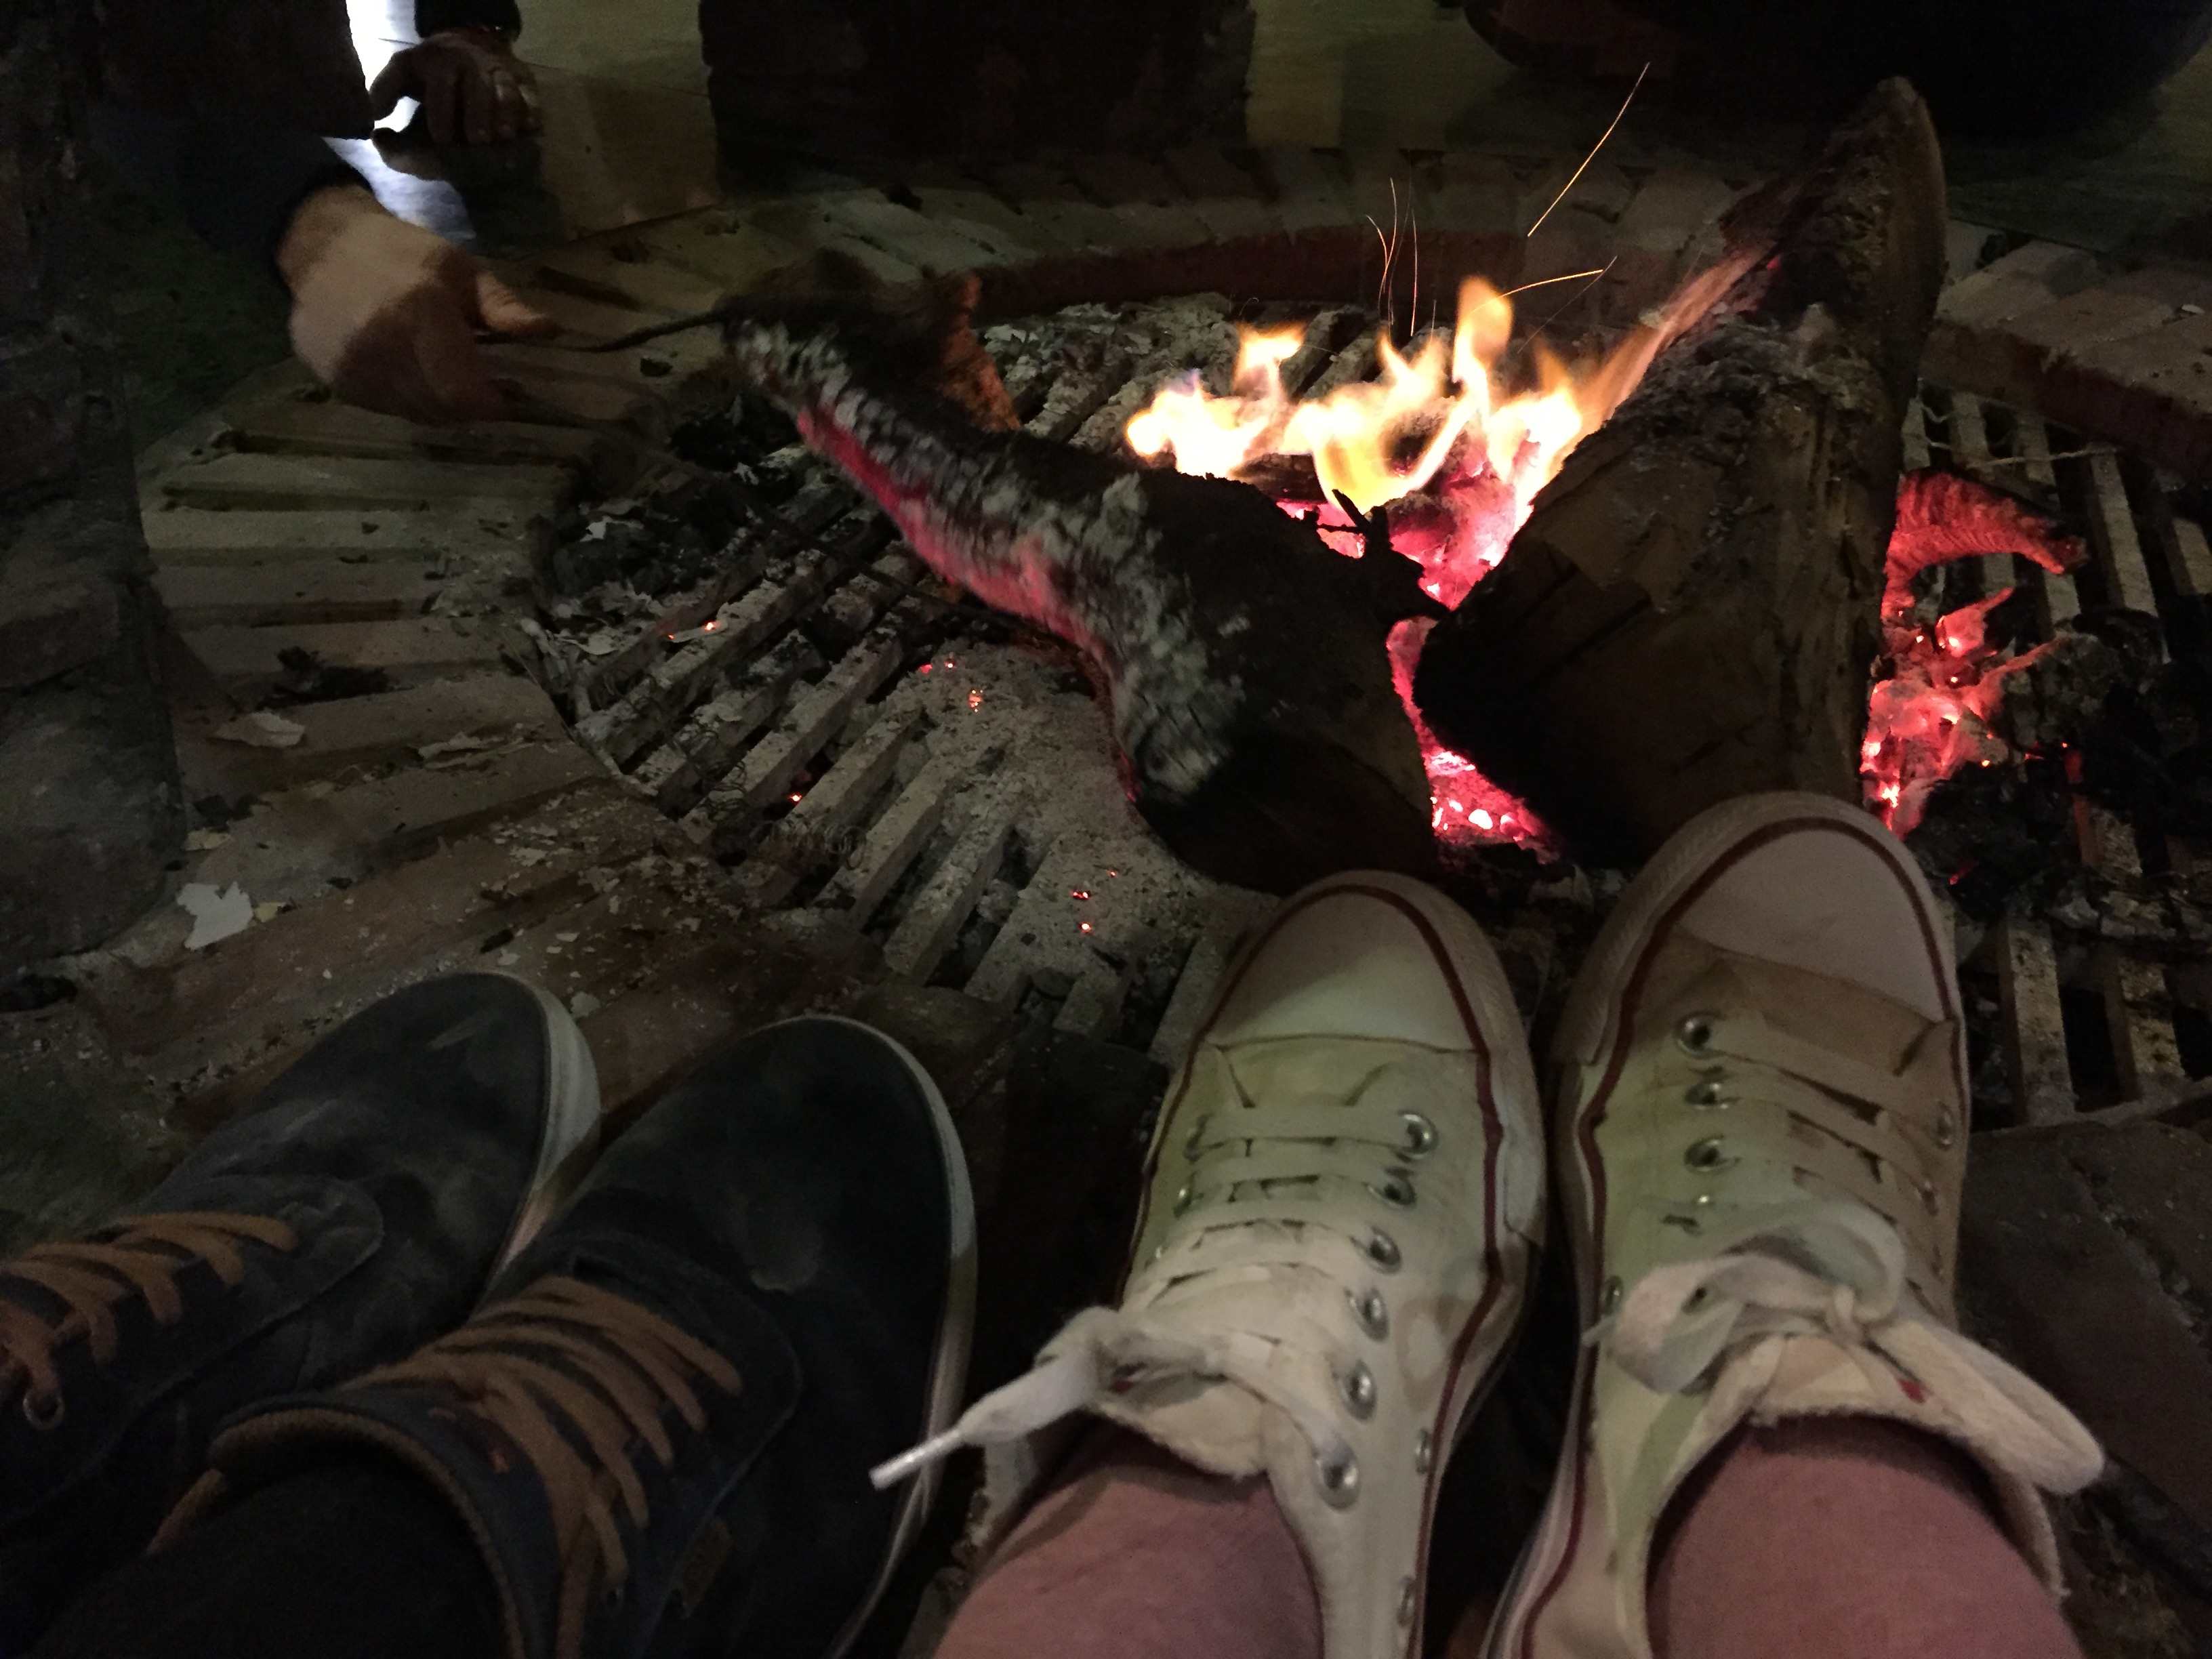 Warming up our feet at the camp